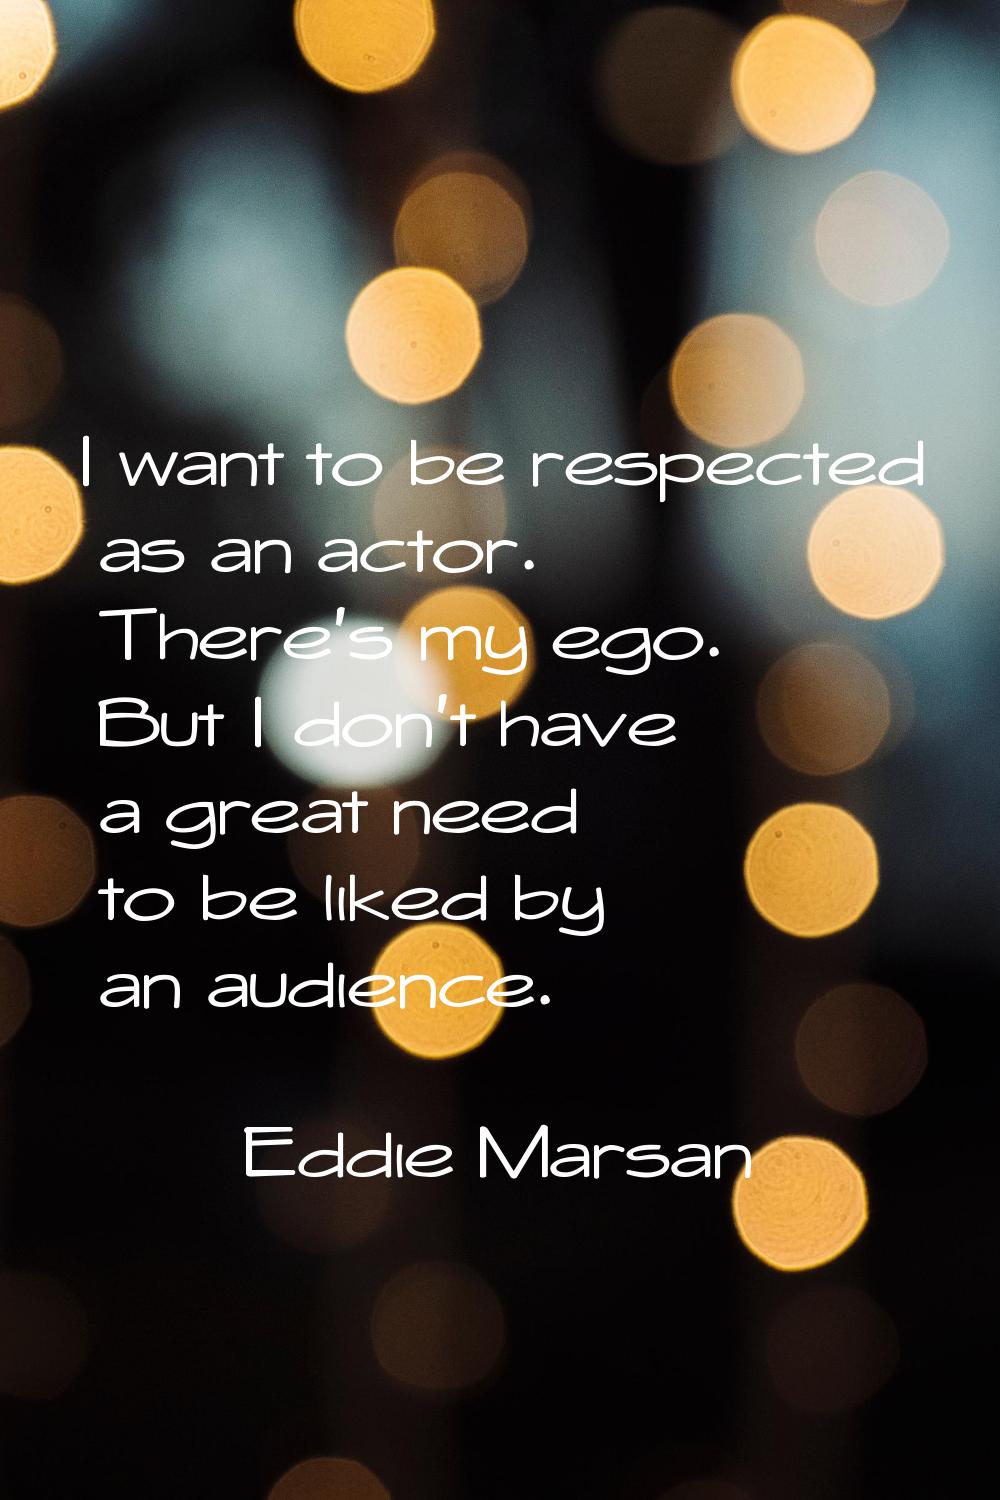 I want to be respected as an actor. There's my ego. But I don't have a great need to be liked by an